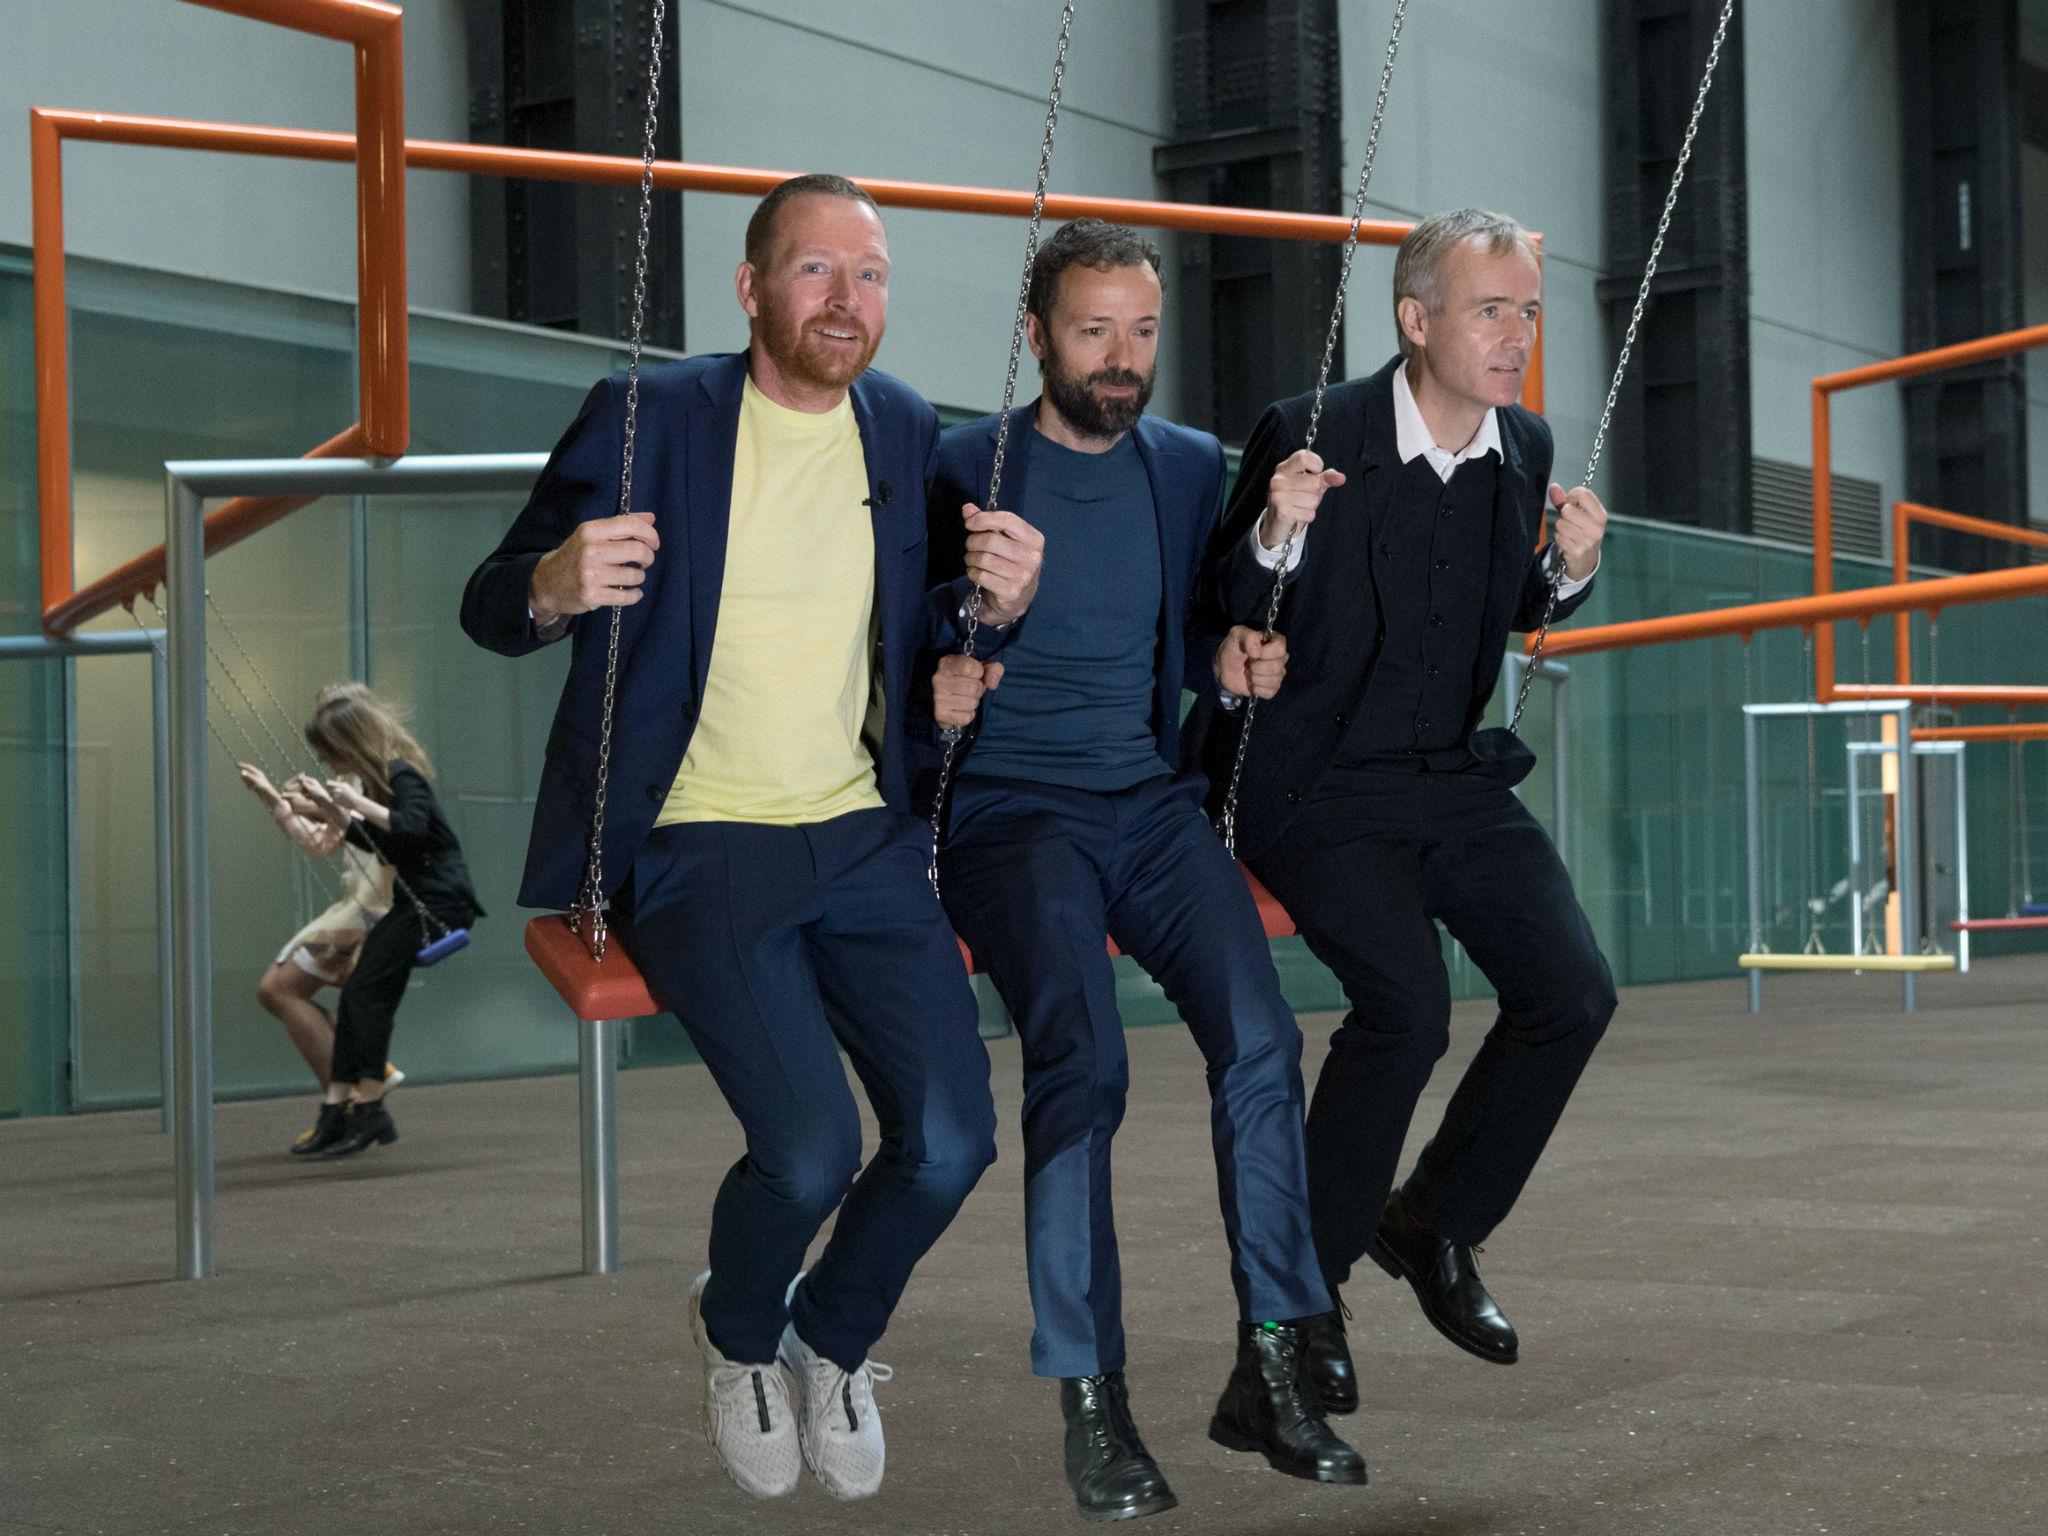 The Danish trio Superflux – from left, Jakob Fenger, Bjornstjerne Christiansen and Rasmus Nielsen – on swings at Tate's Turbine Hall, which has been turned into a kids' playground called 'One Two Three Swing!'